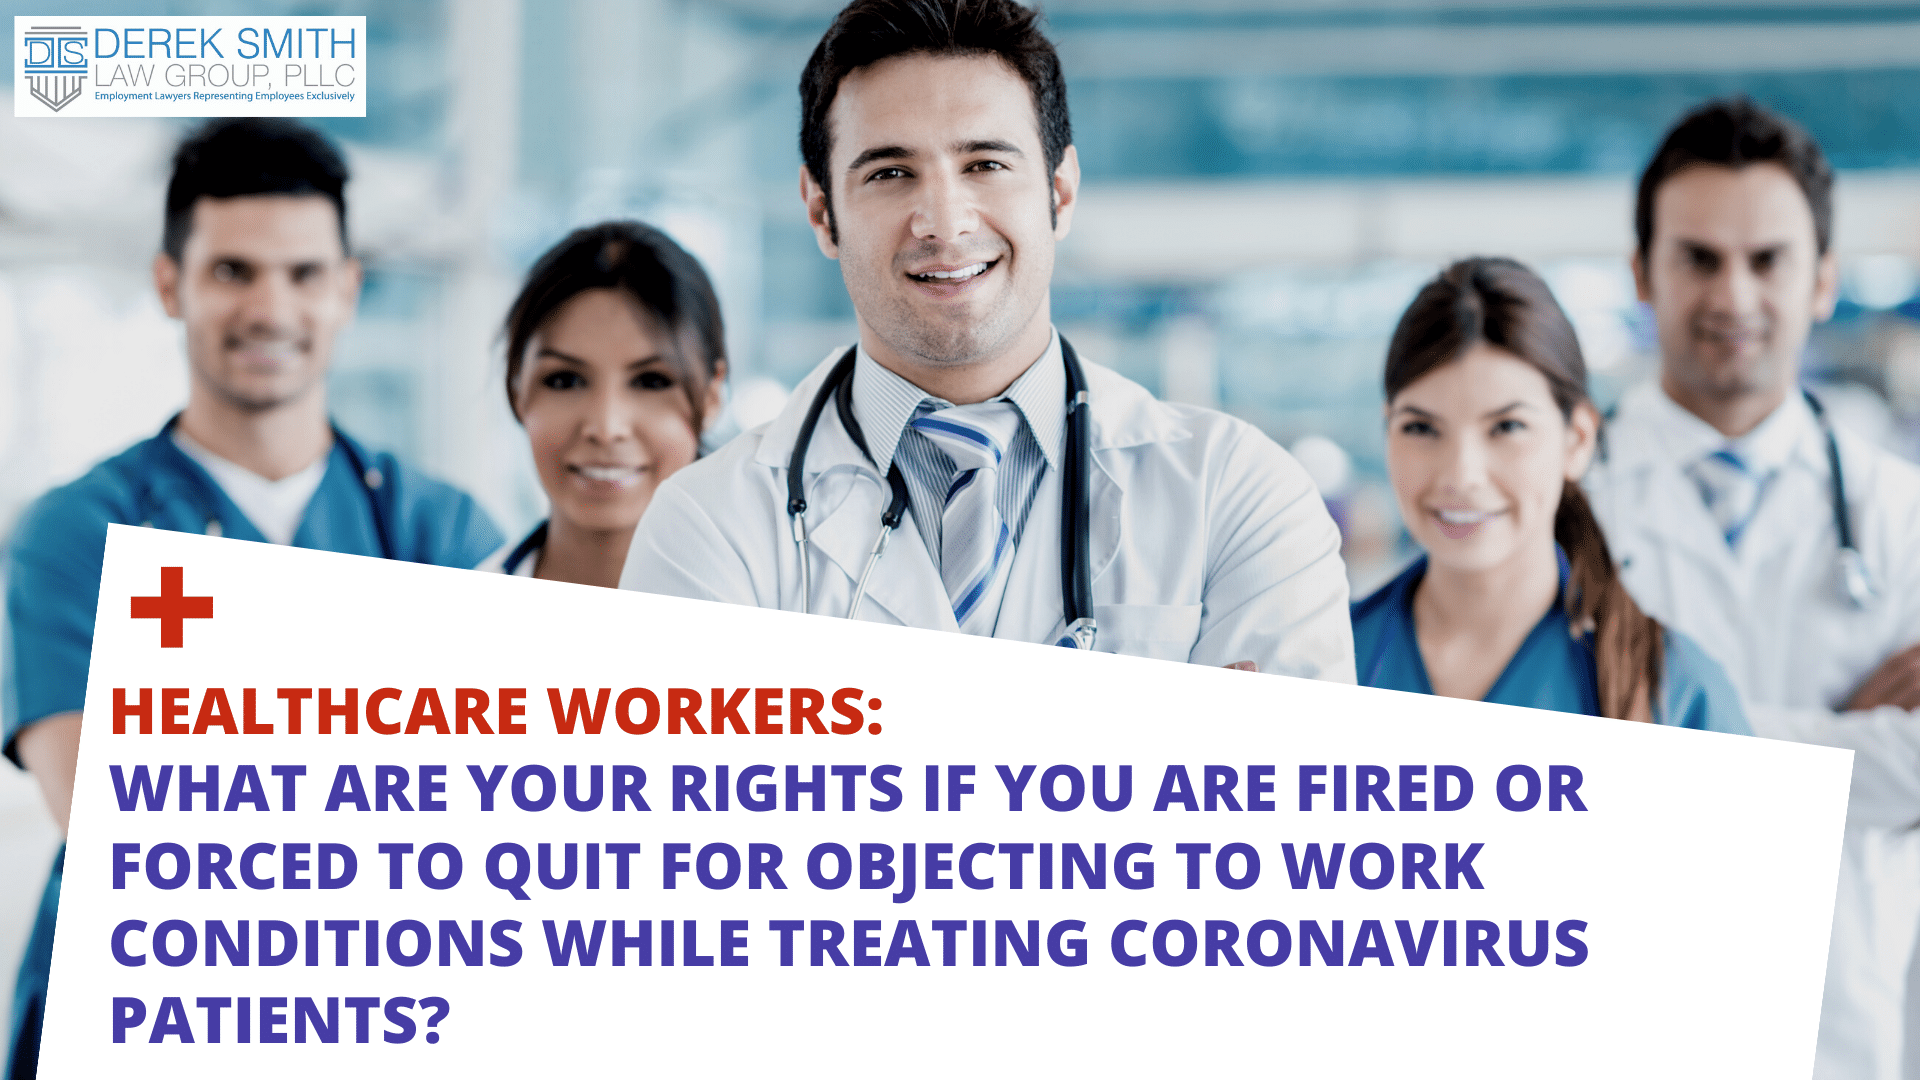 Healthcare Workers’ Rights When Fired or Forced to Quit for Objecting to Work Conditions While Treating Coronavirus Patients